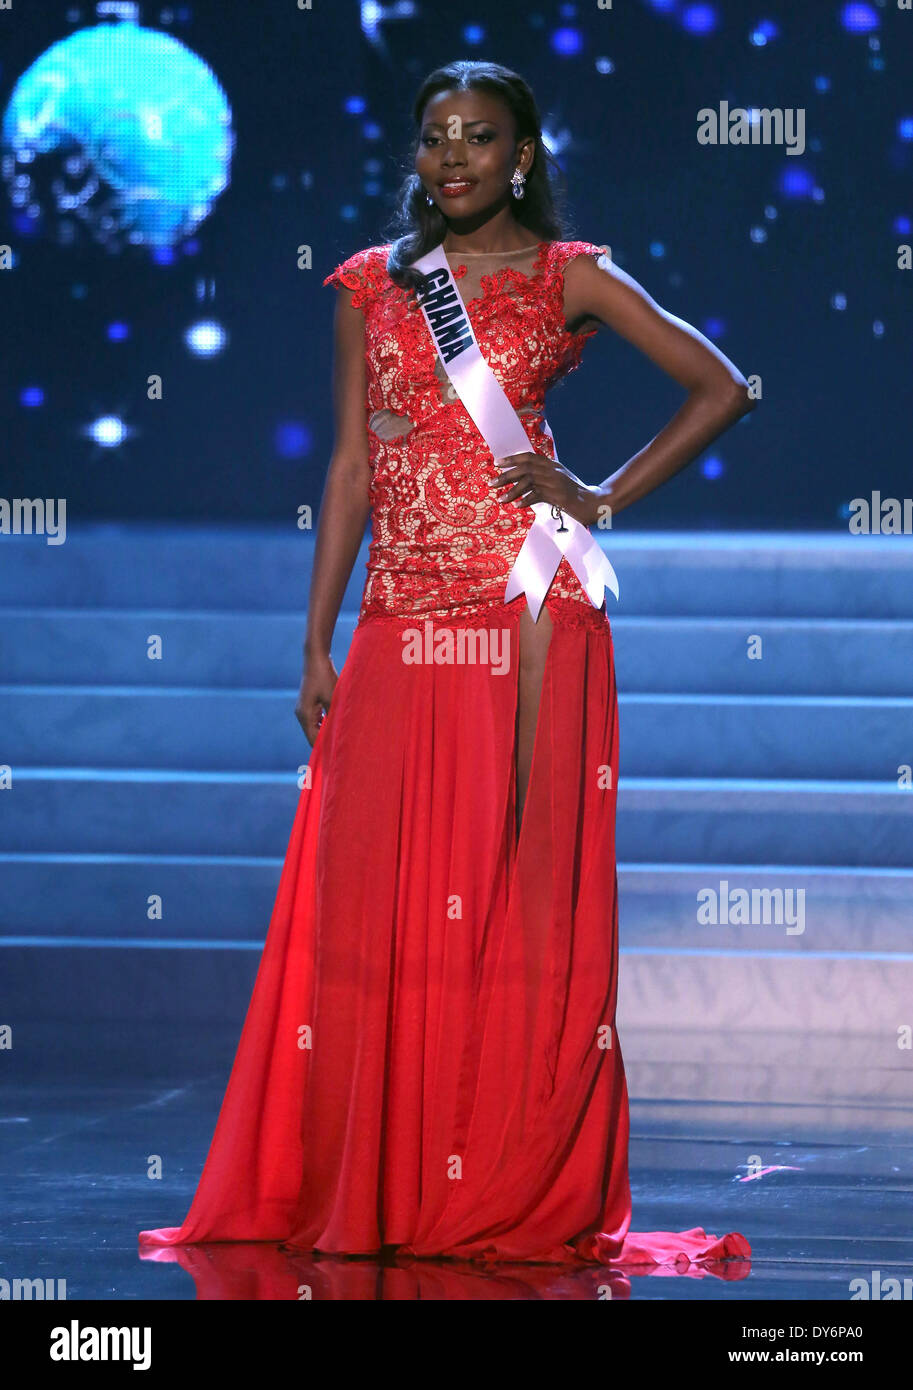 2012 Miss Universe Wahl Vorrunde bei PH Live Theater im Planet Hollywood Resort and Casino Las VegasFeaturing: Gifty Ofori, Miss Ghana wo: Las Vegas Nevada USAWhen: 13. Dezember 2012 Stockfoto